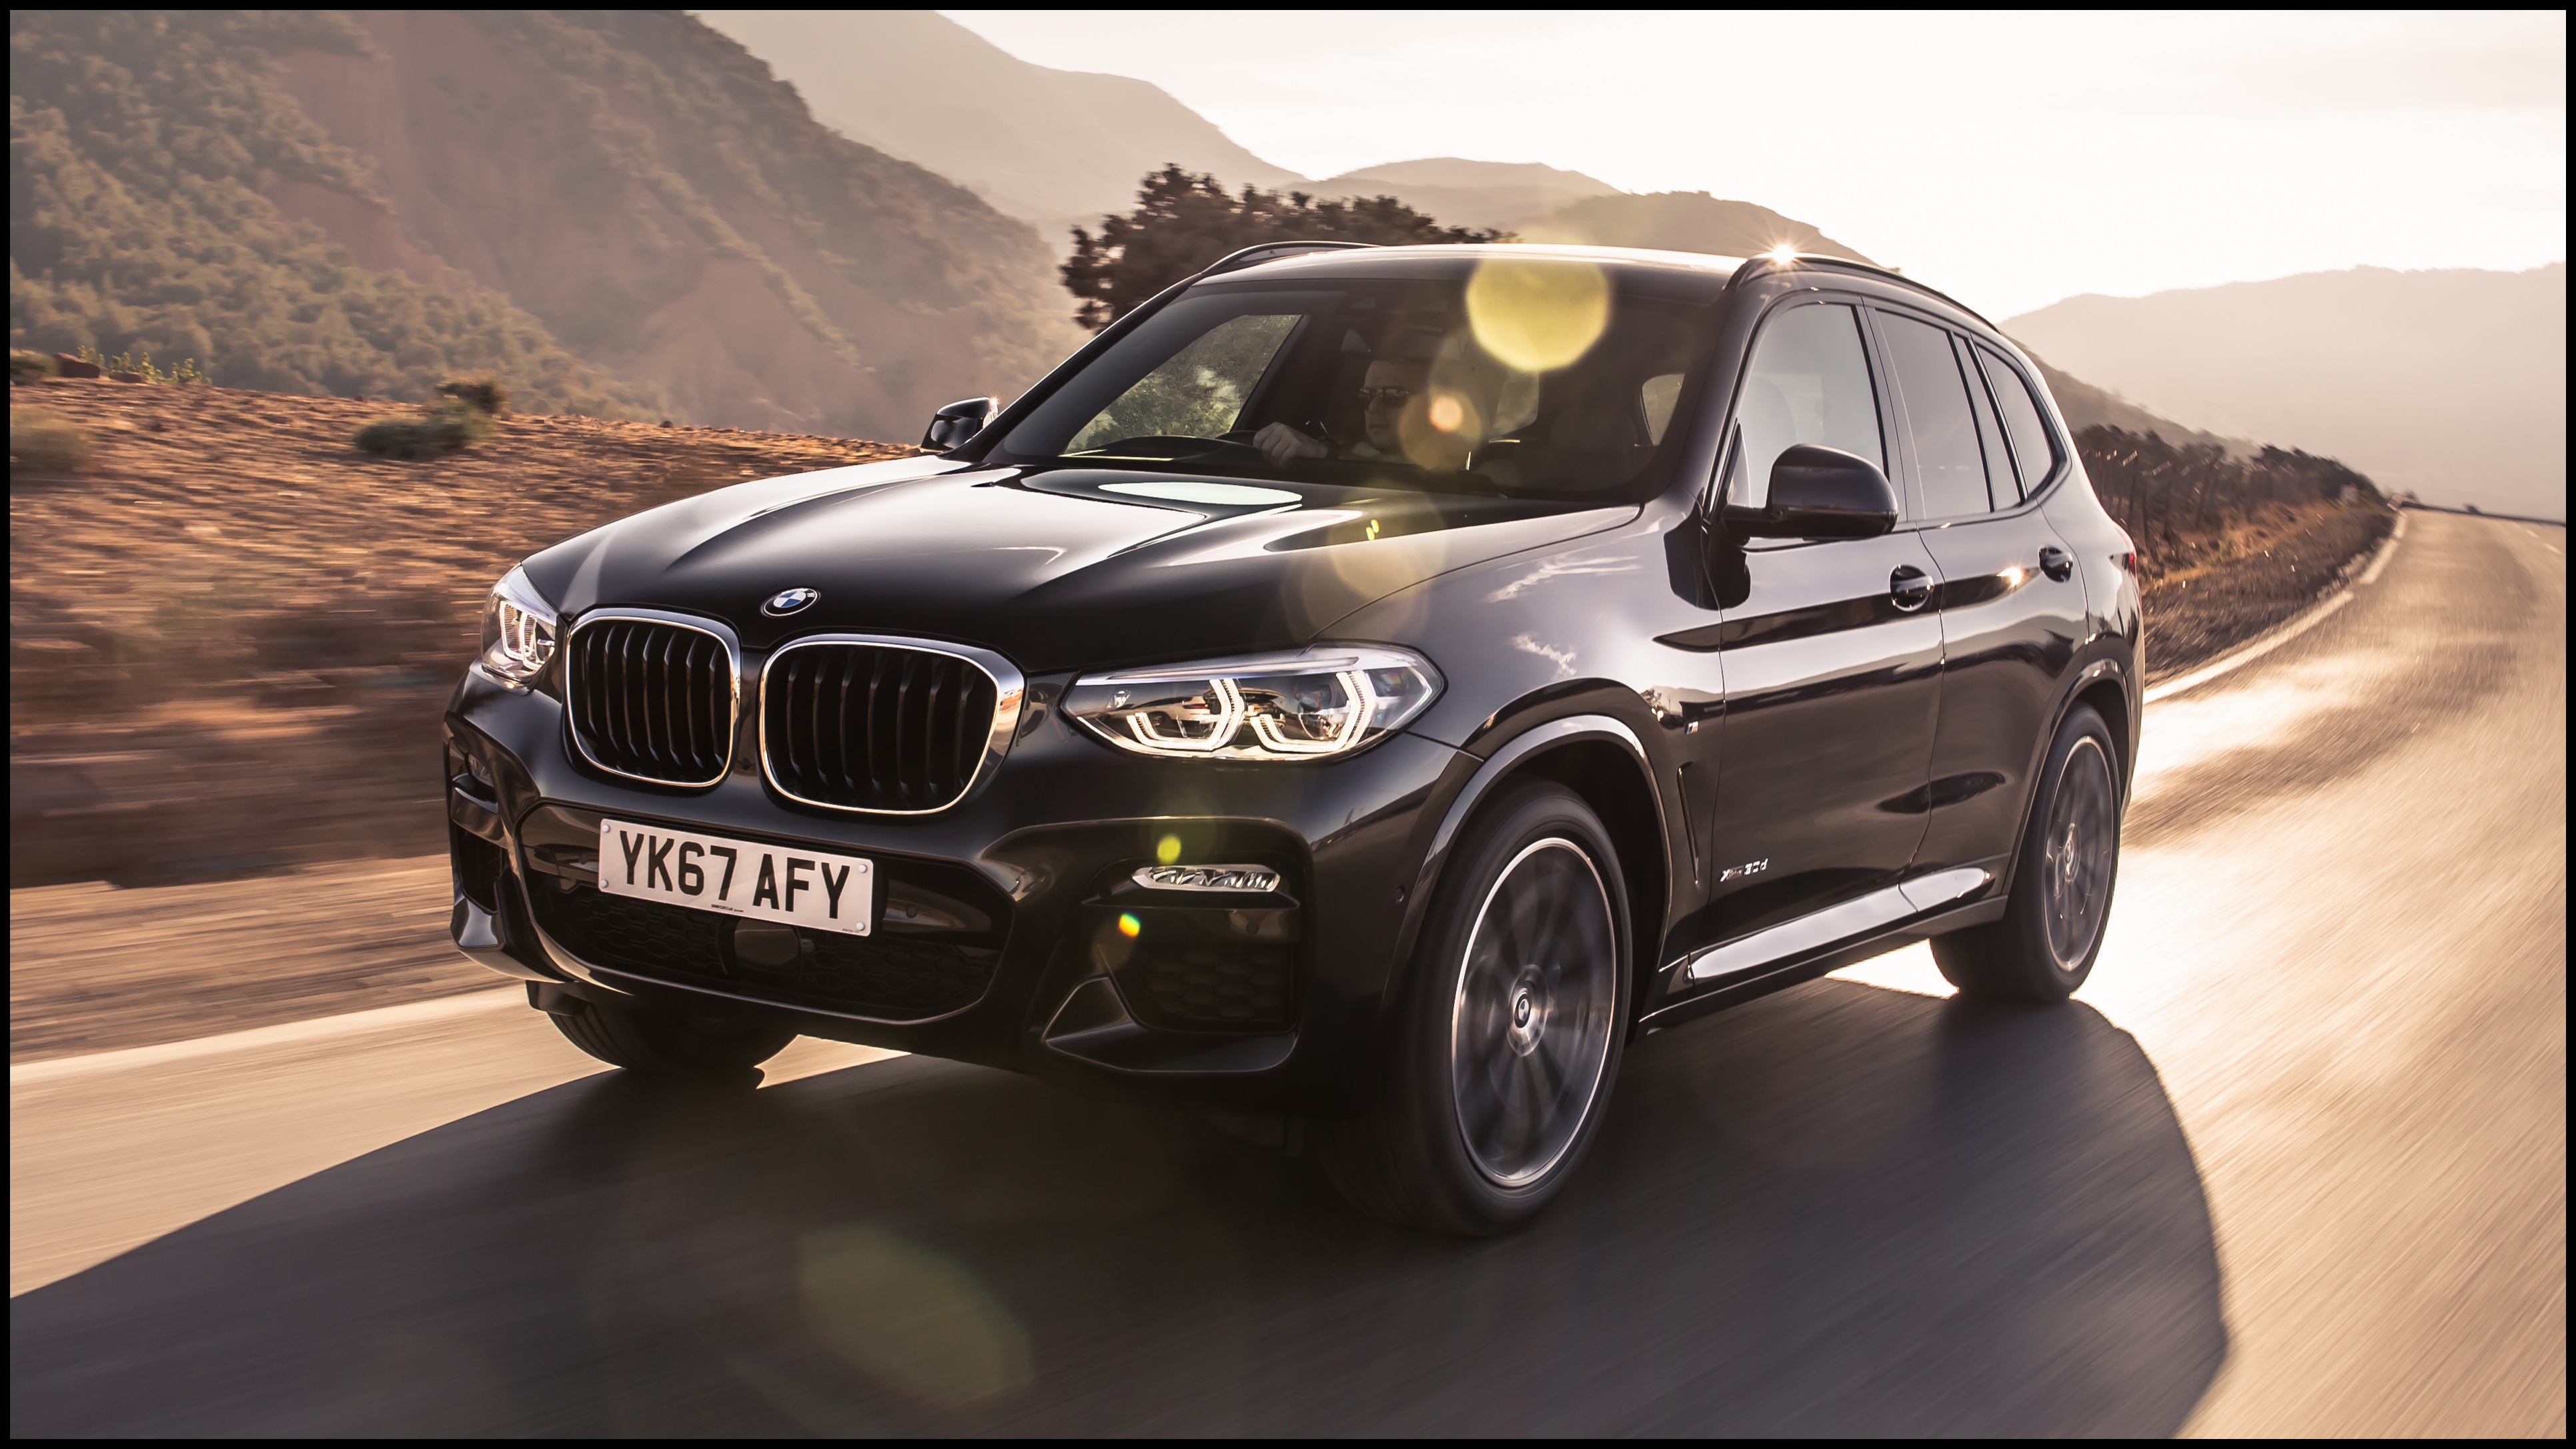 BMW X3 3 0d review 261bhp SUV tested